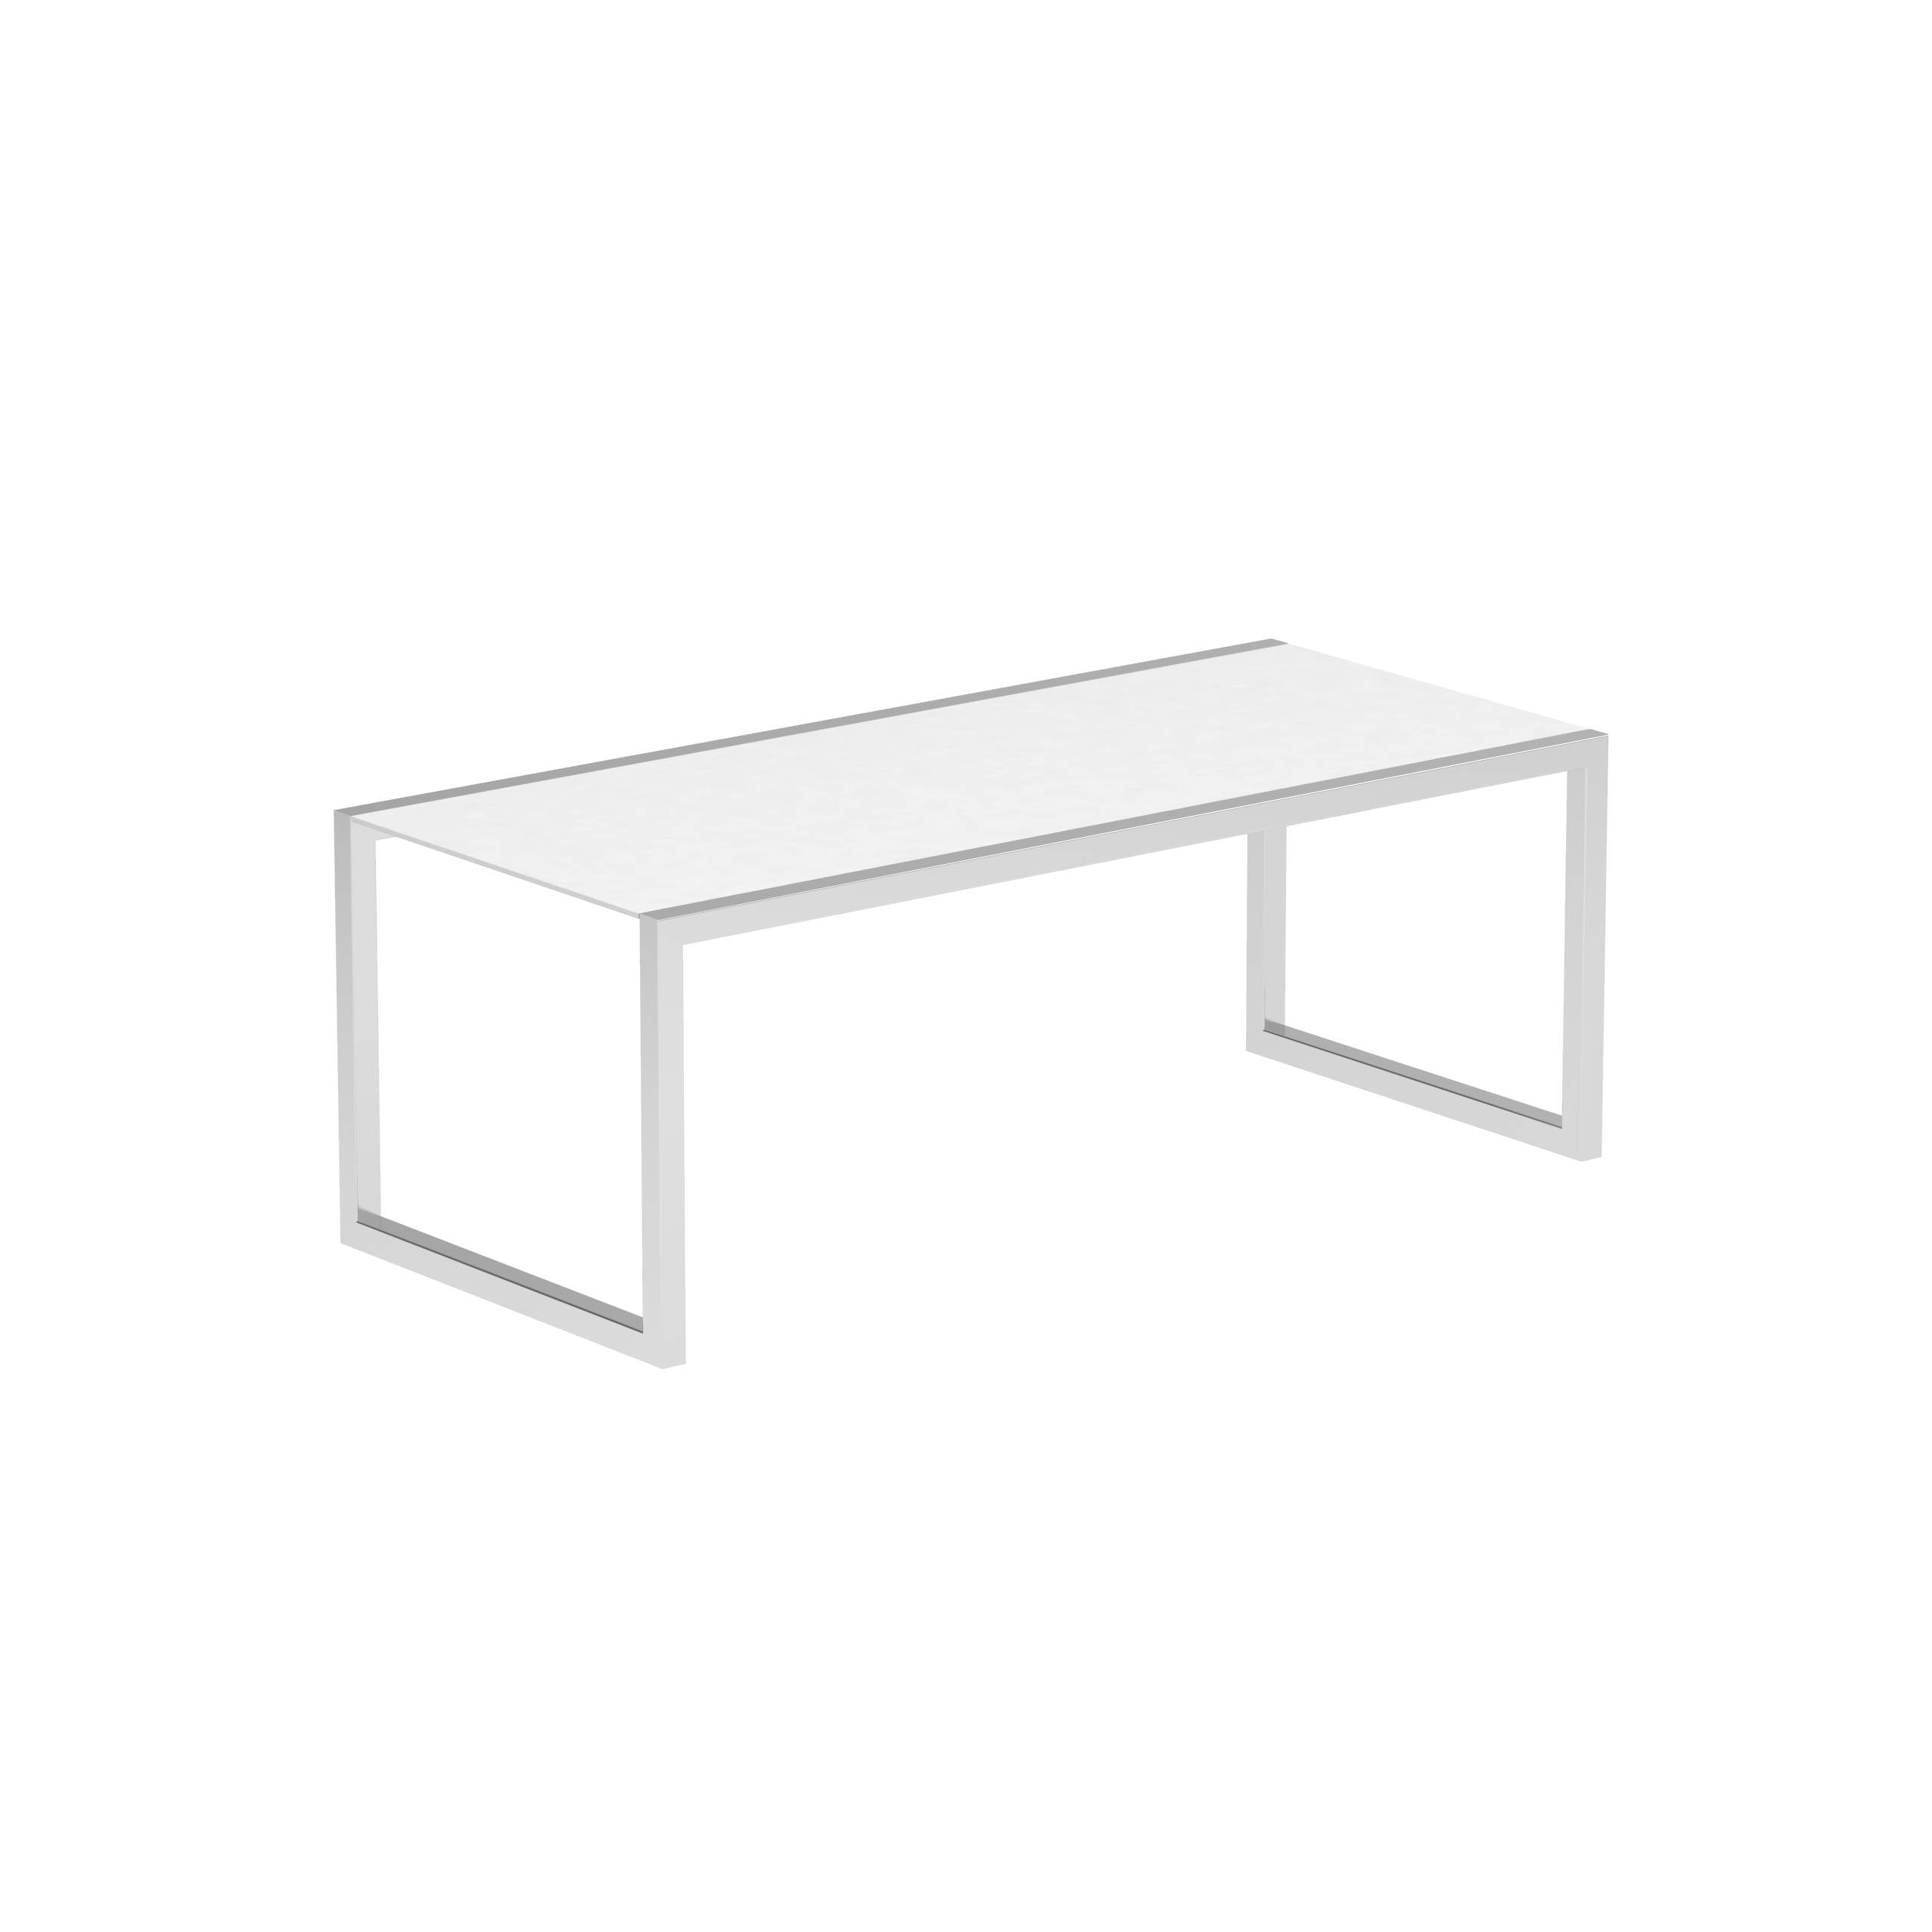 Ninix Table 200x90cm With Stainless Steel El.Pol And Ceramic White